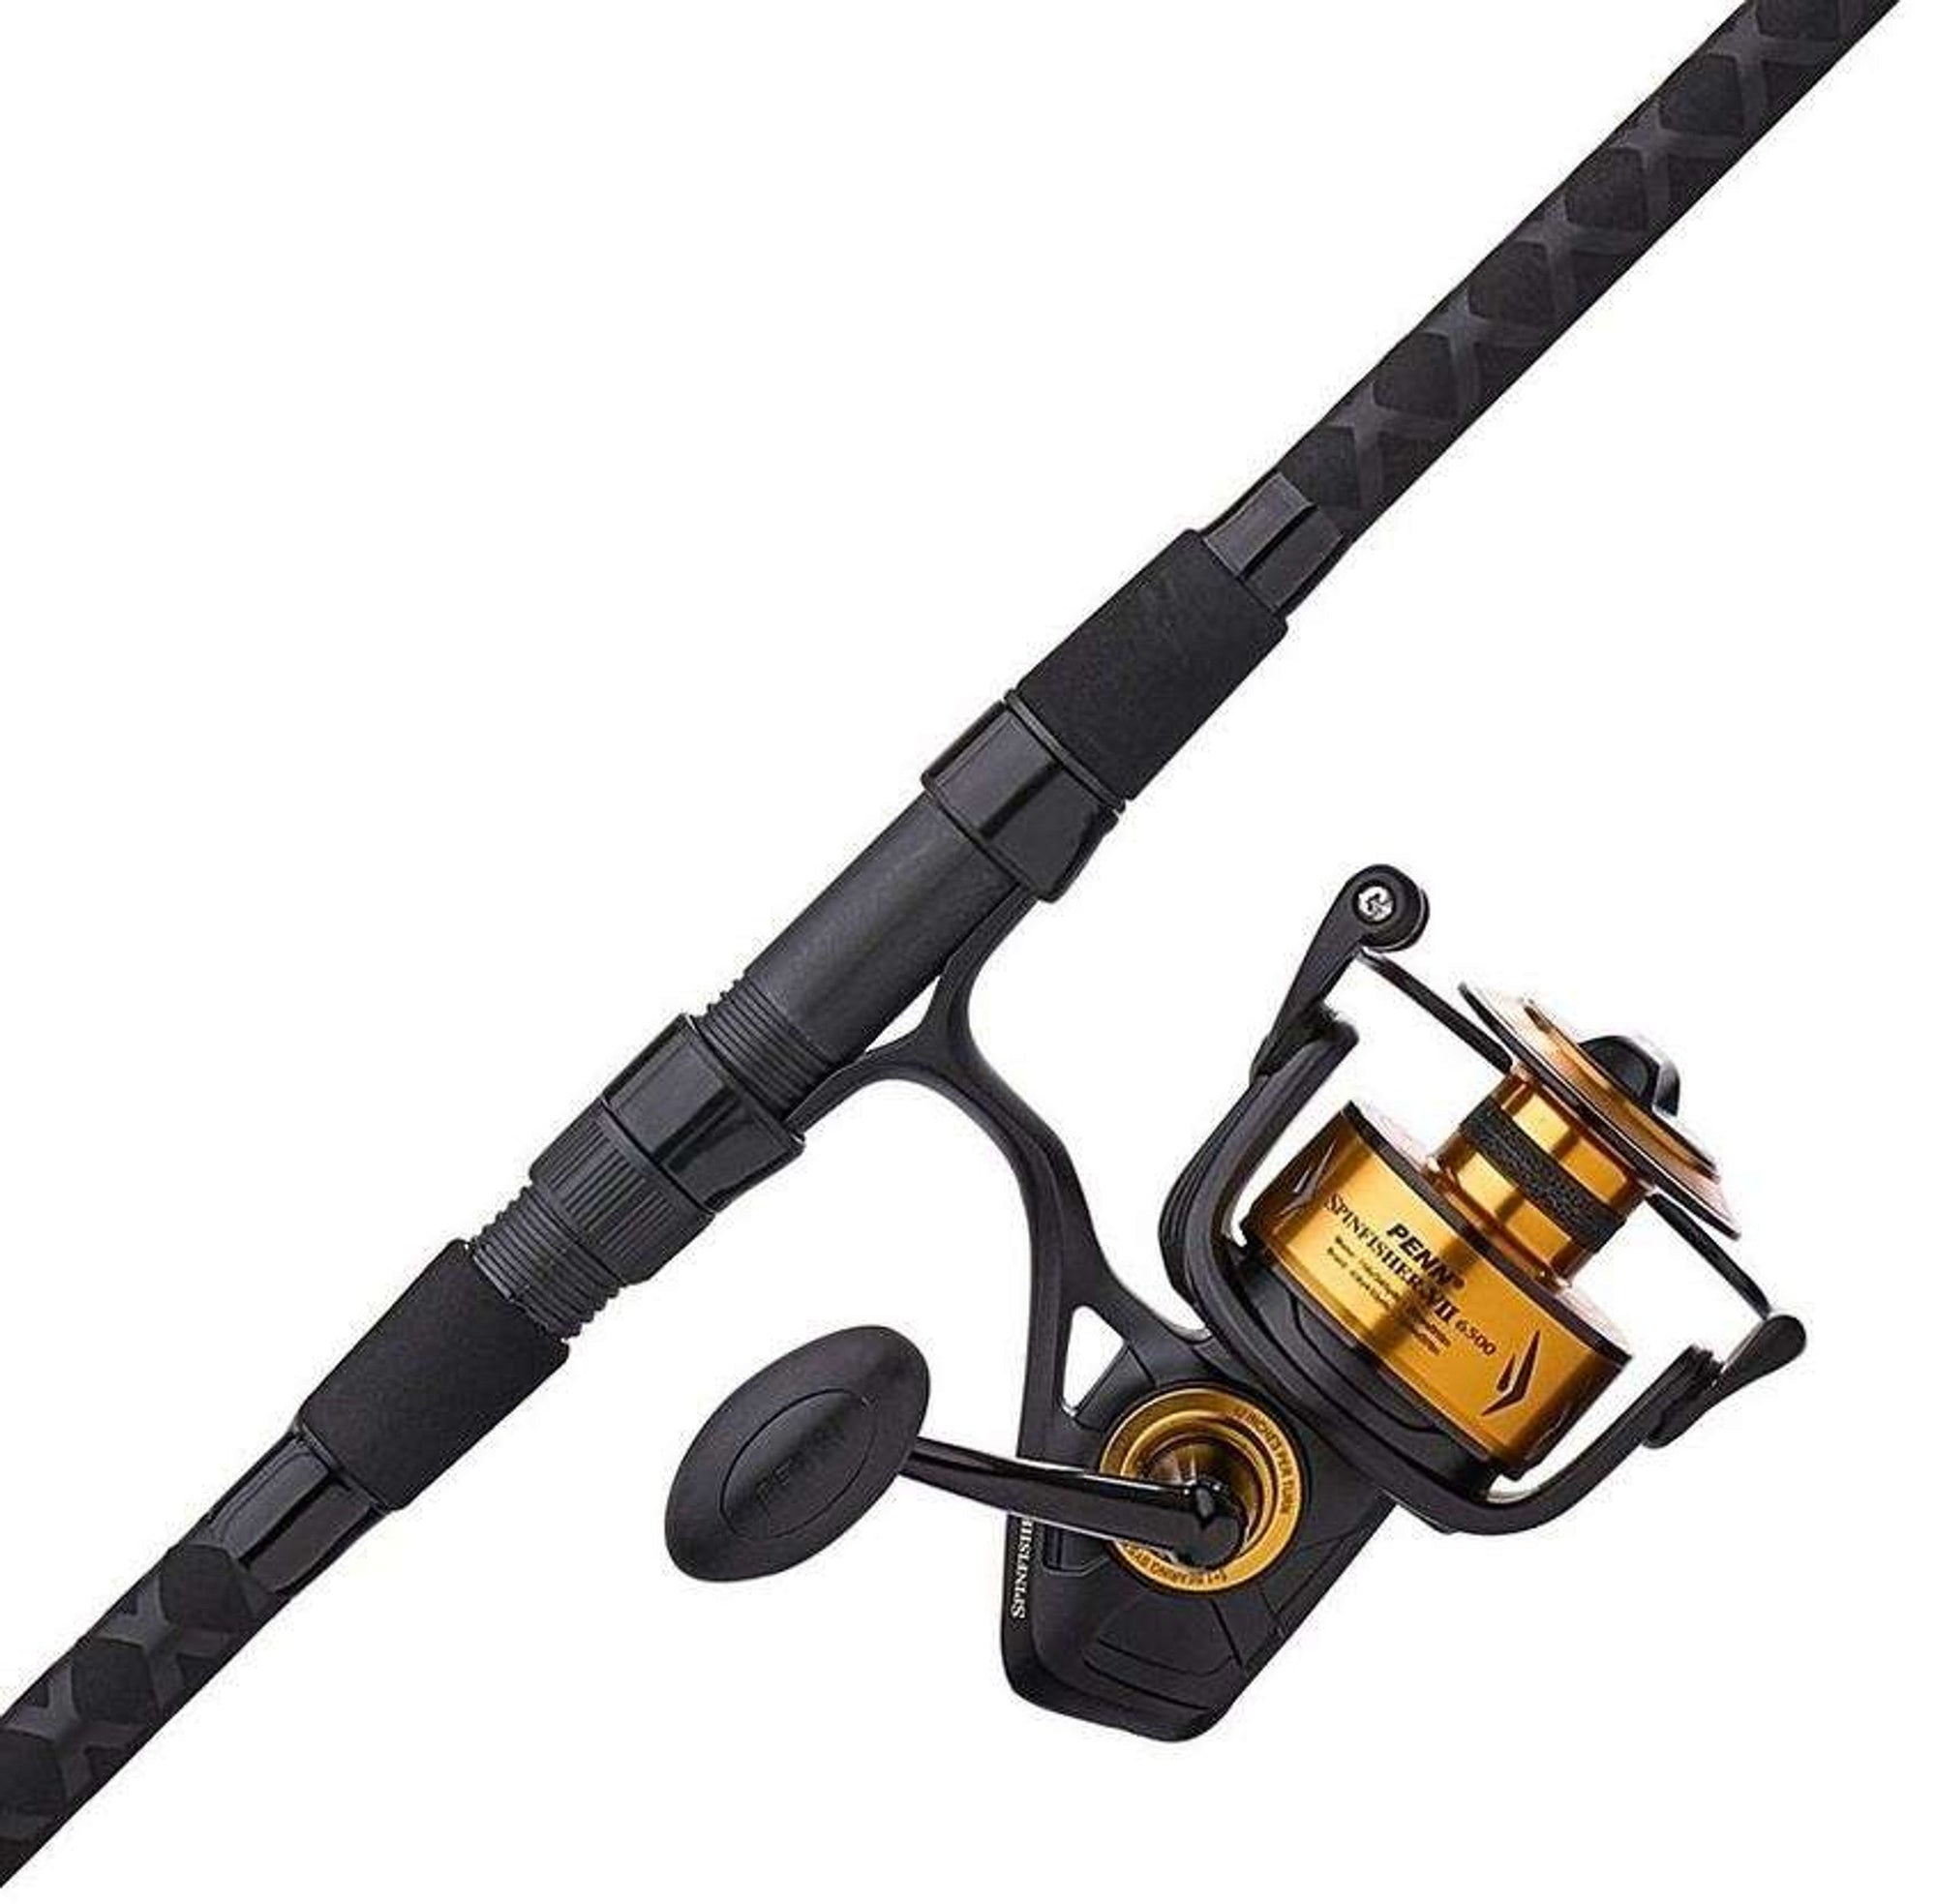 Penn Spinfisher VII Combo 7500 with 7' H 1-Piece Spin Combo - SSVII7500701H